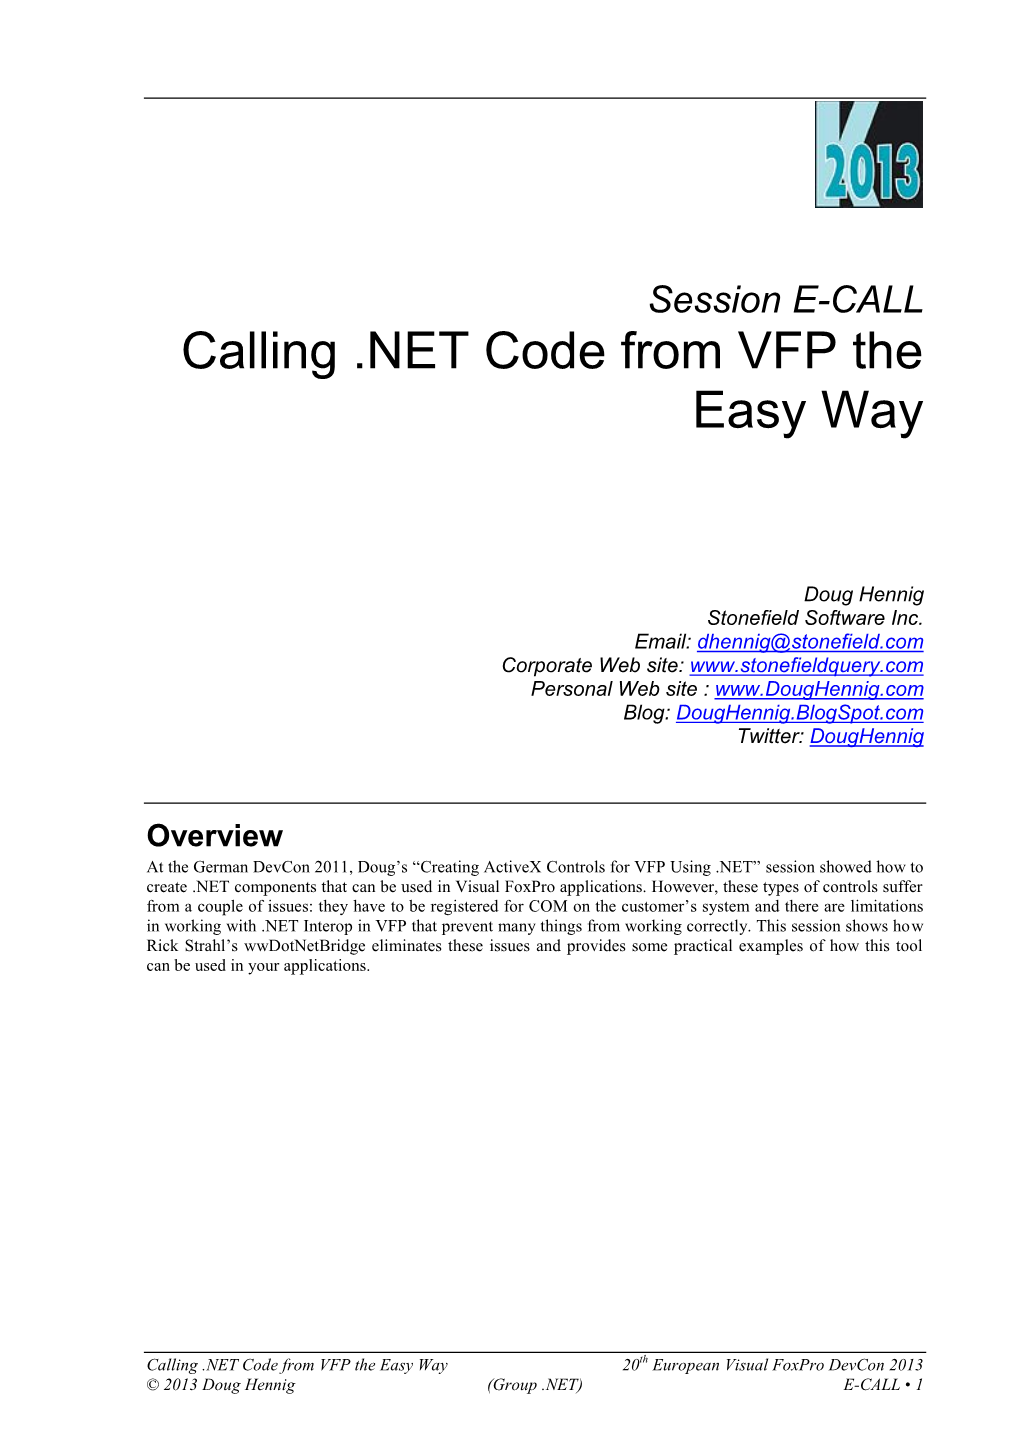 Calling .NET Code from VFP the Easy Way